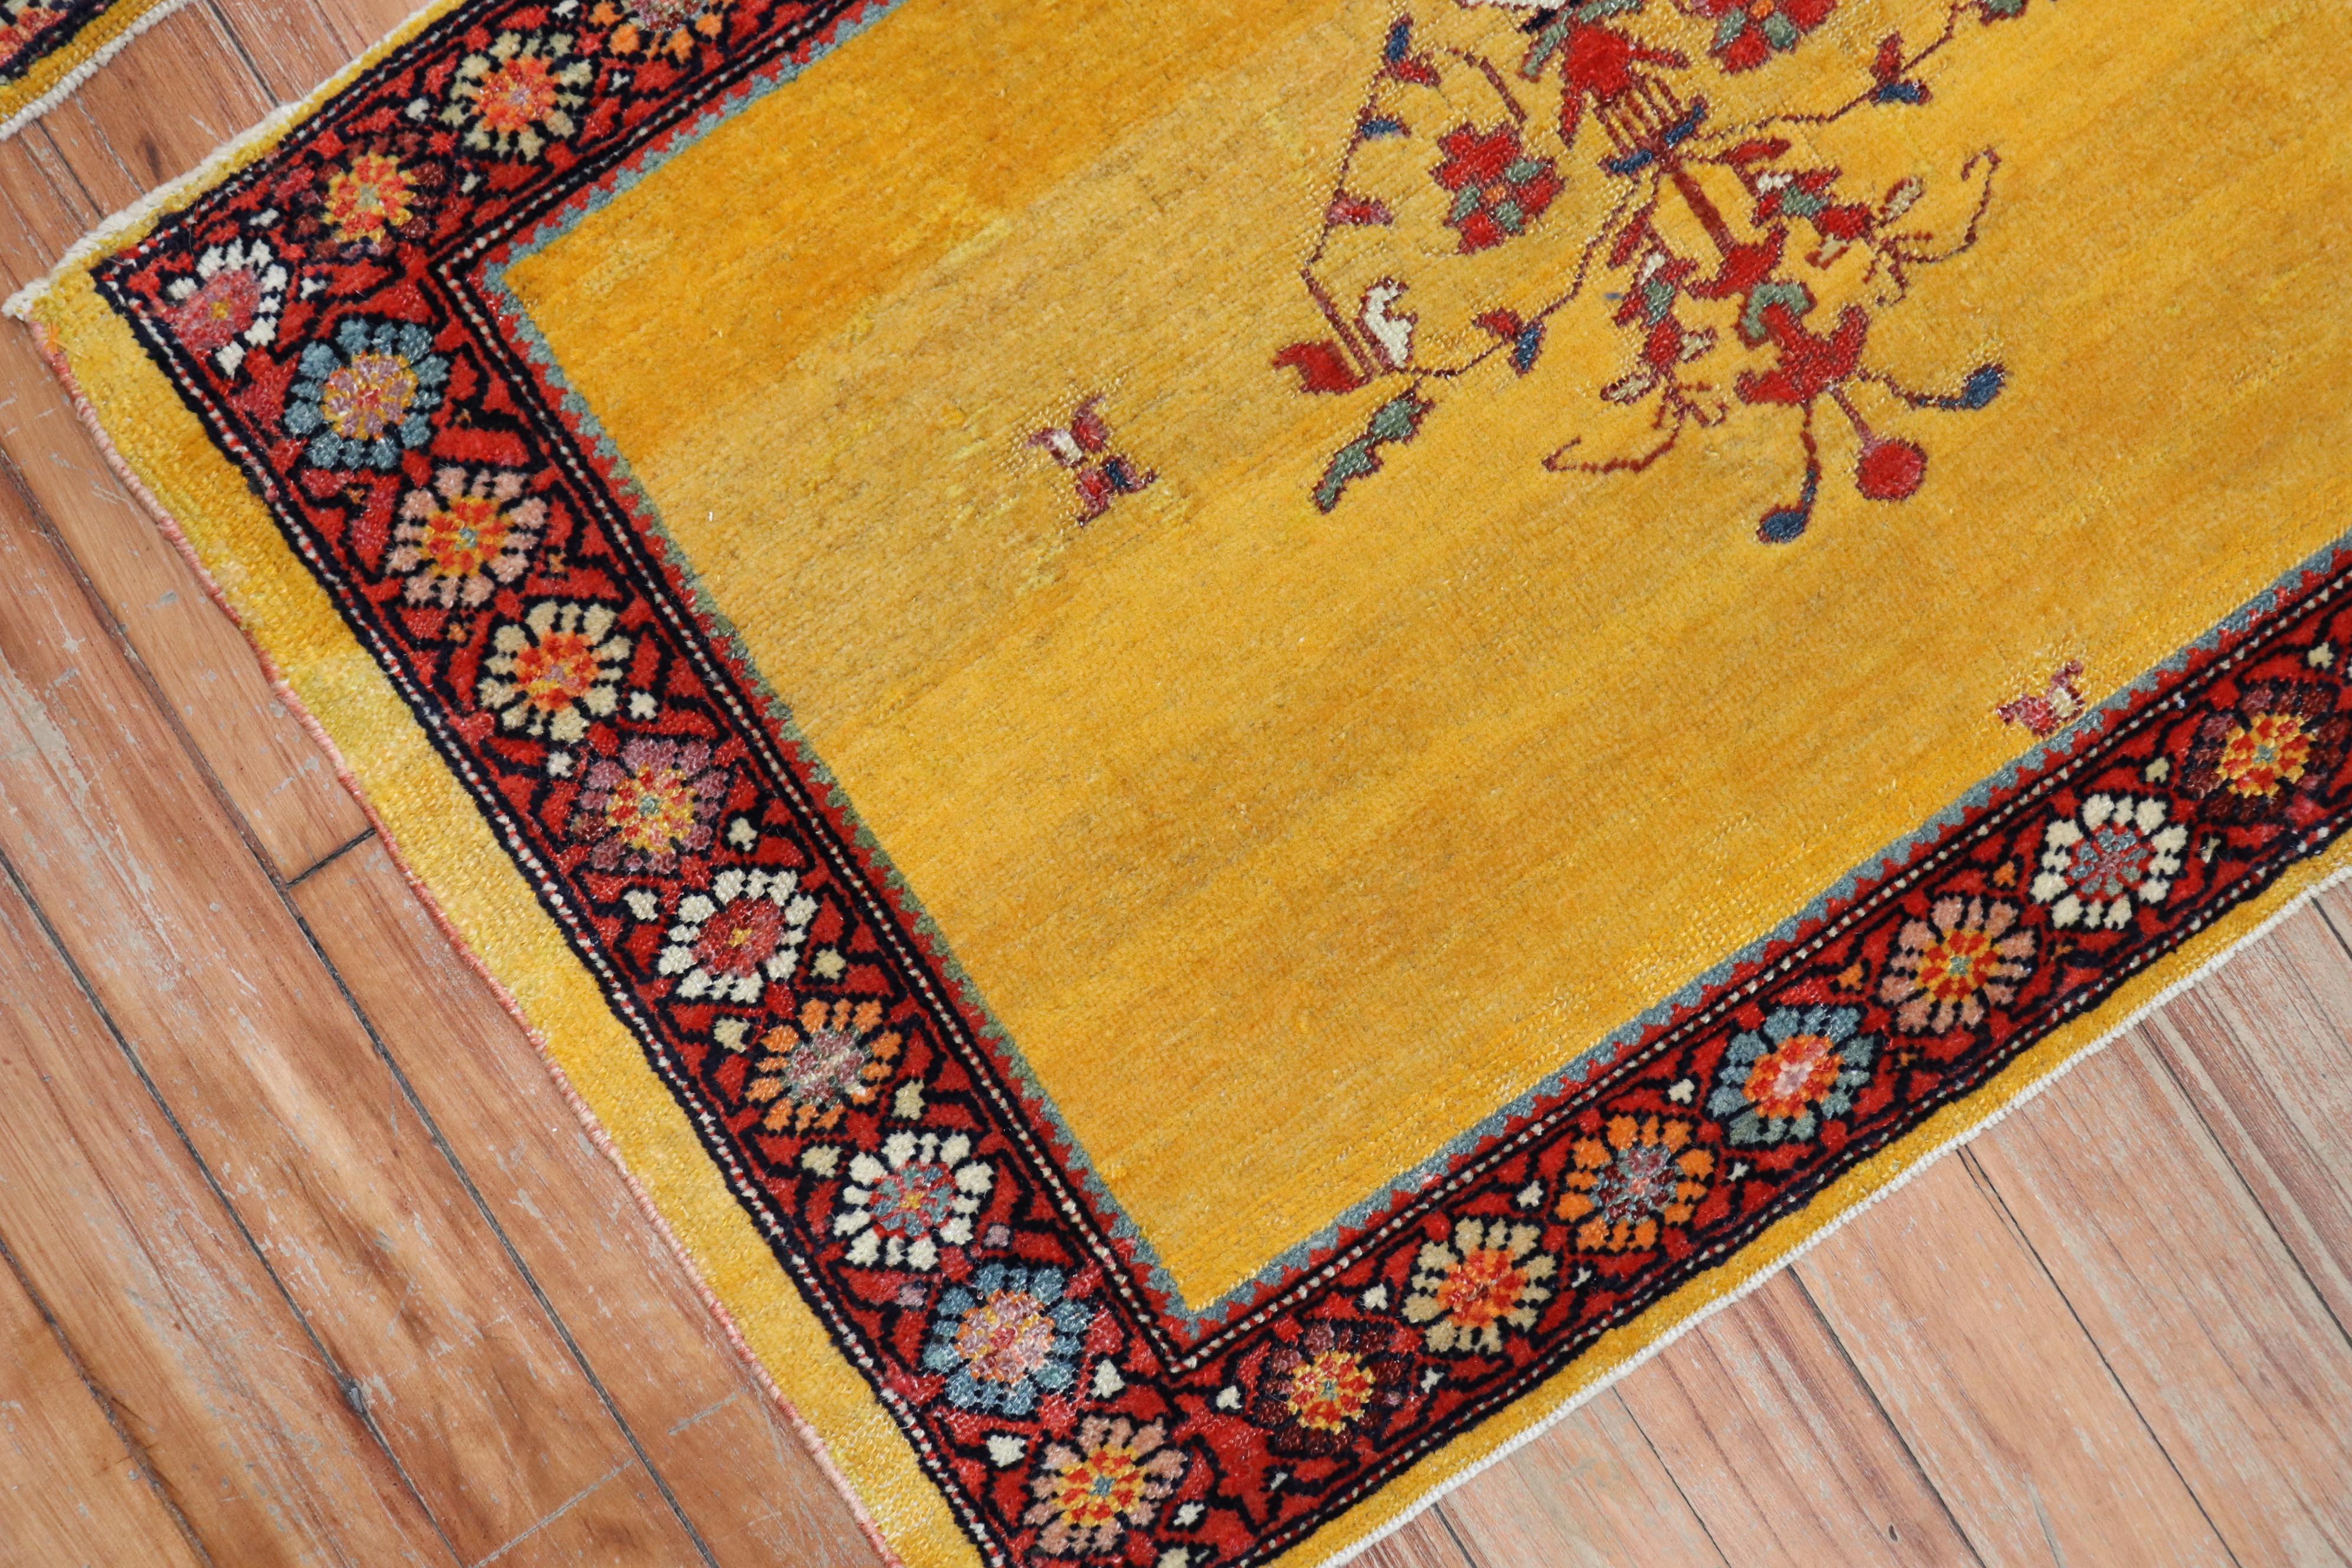 A whimsical pair of one of a kind Persian Ferehan rugs with a bright yellow

Measuring 19